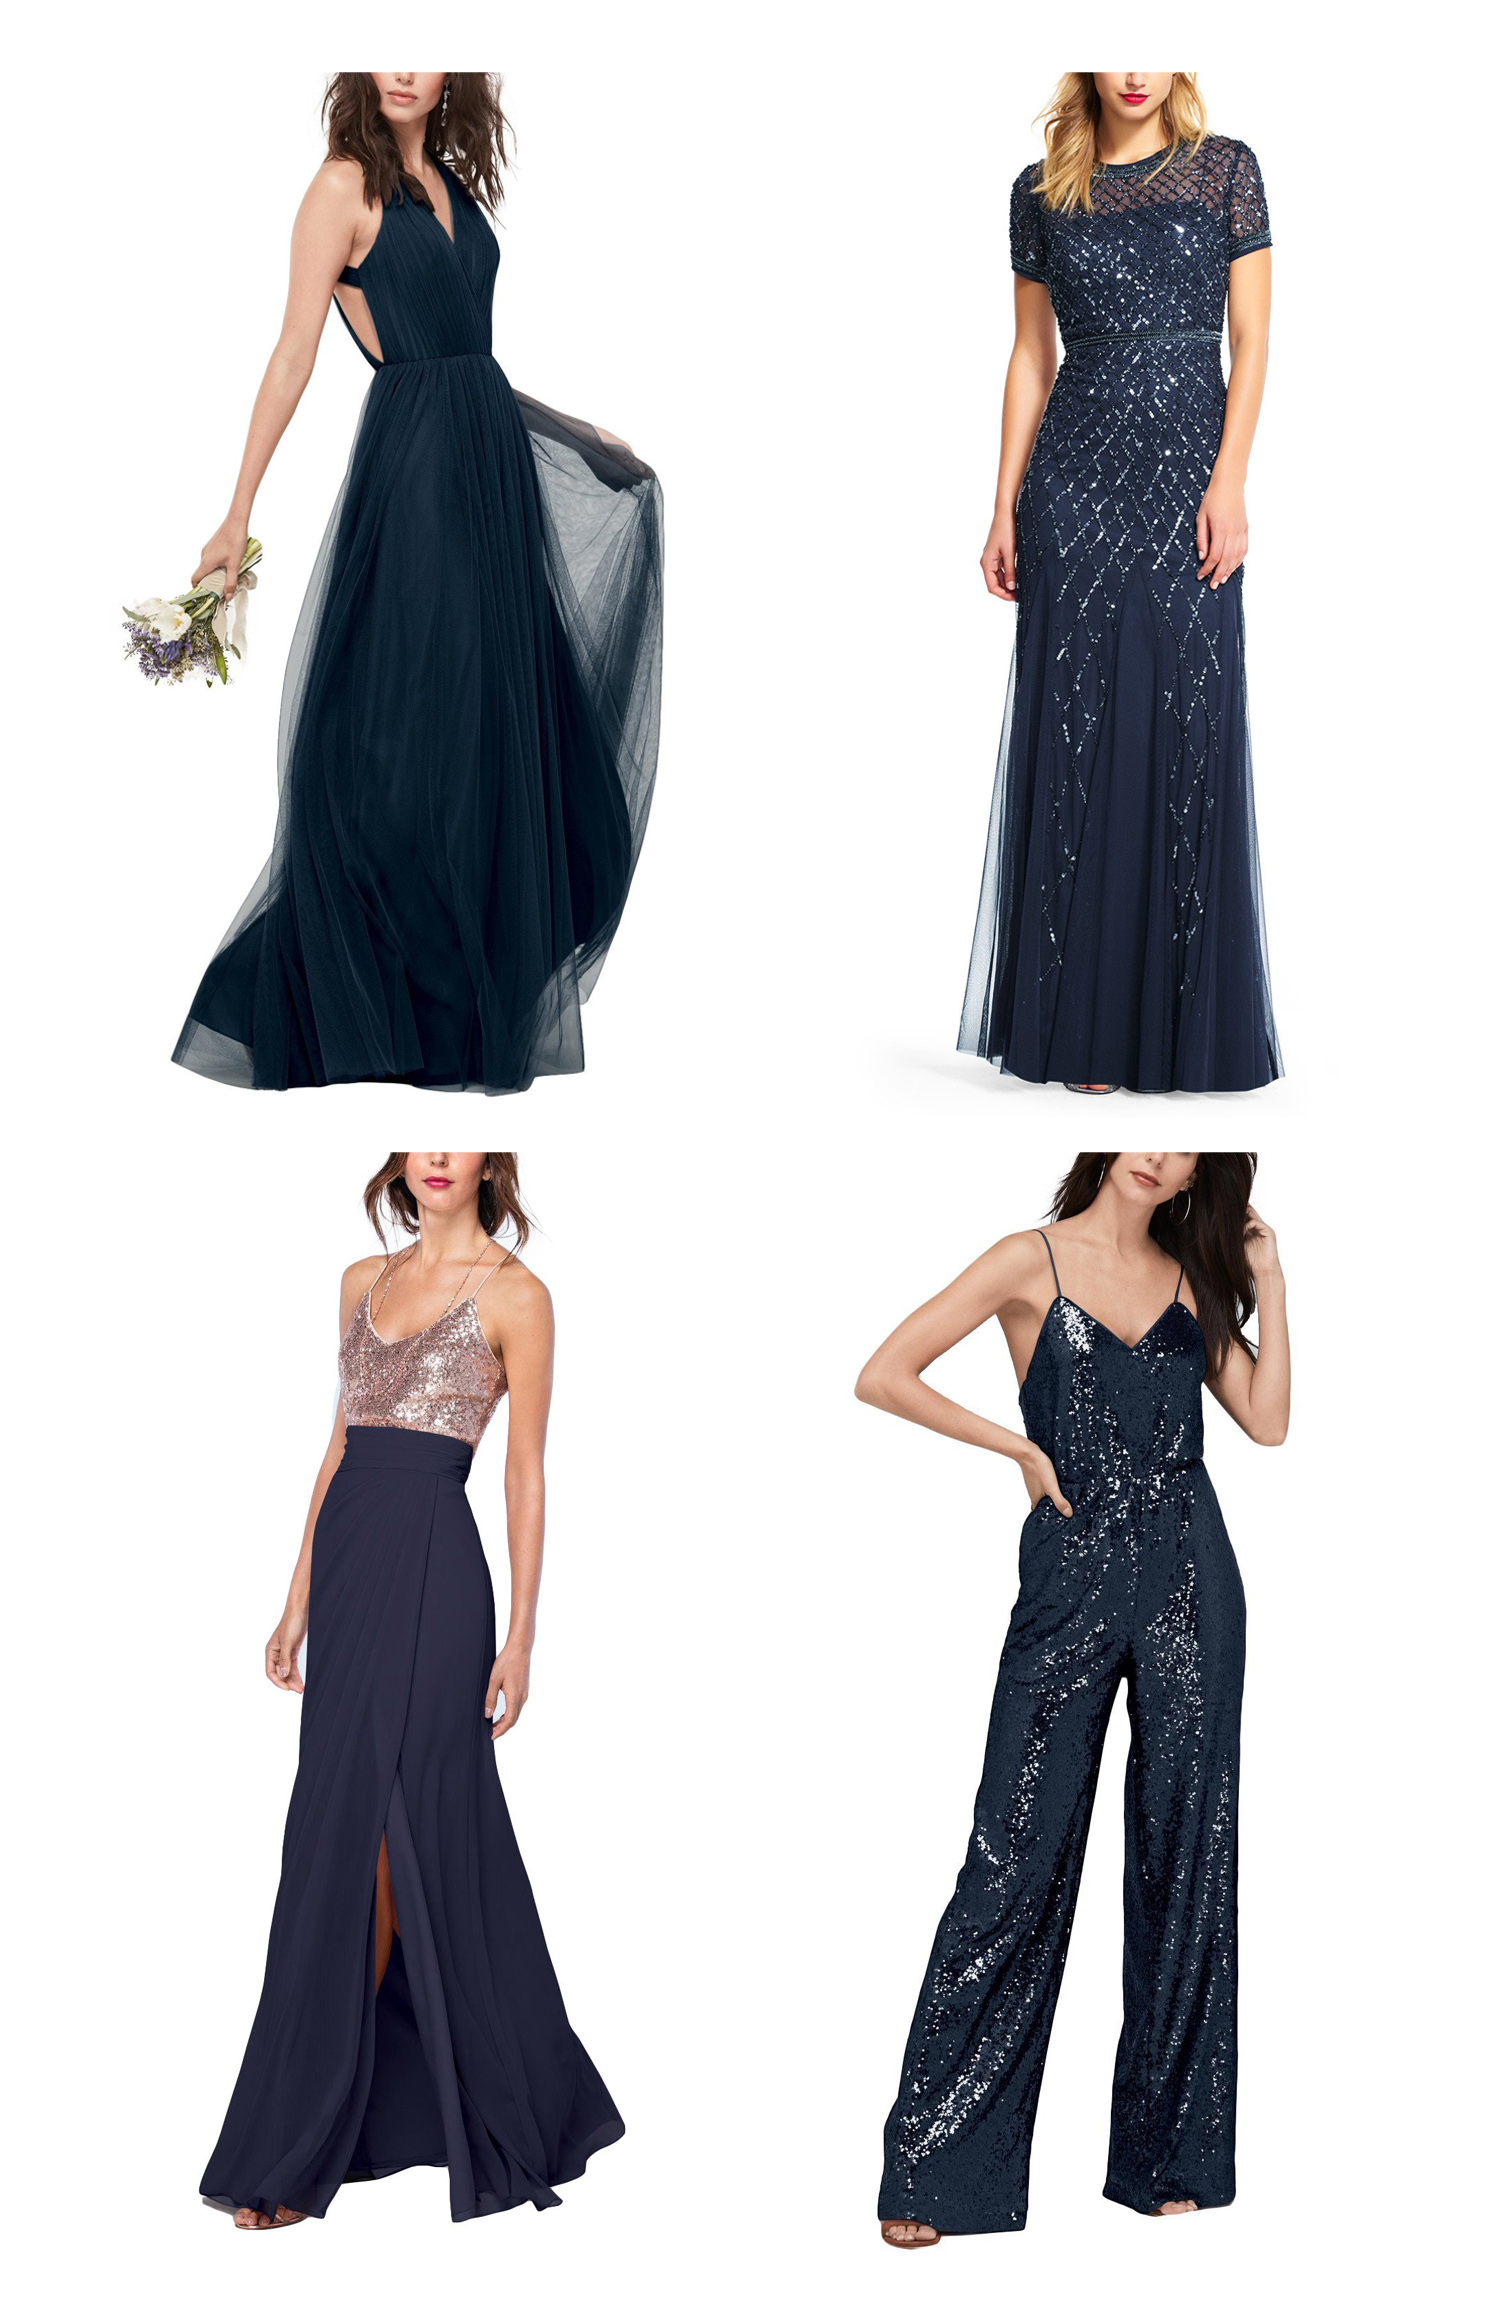 graphic featuring mismatched bridesmaid dresses in shades of navy and sequins